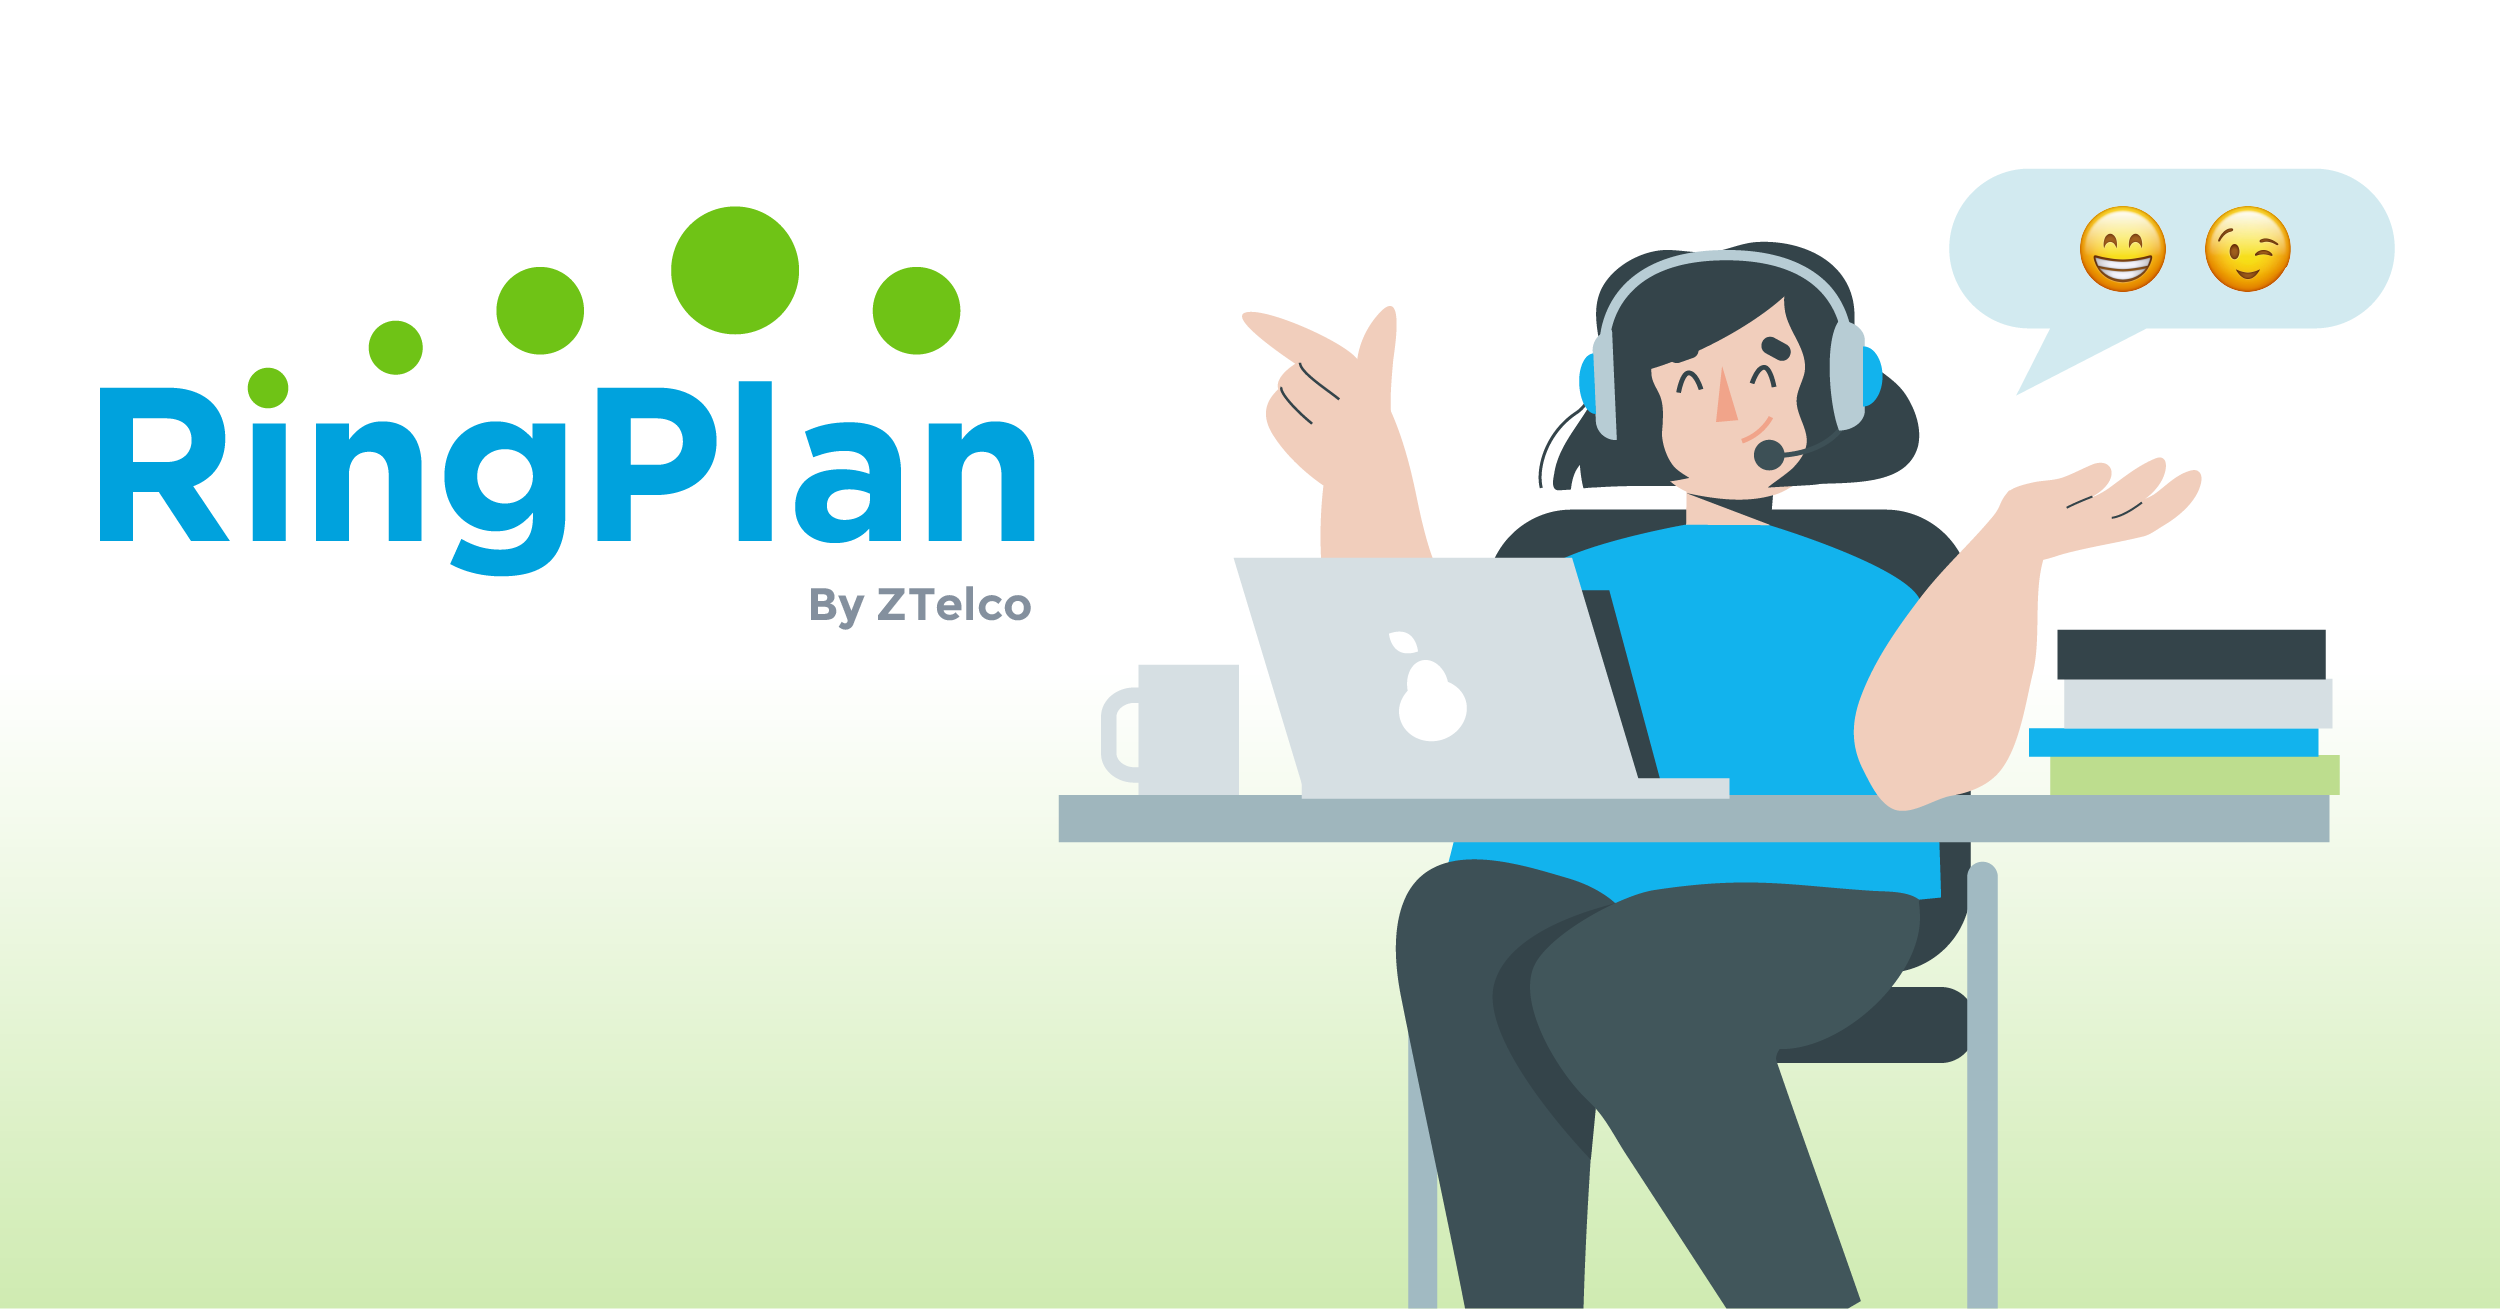 ZTelco Launches a Powerful, Cloud-based Phone System Called RingPlan